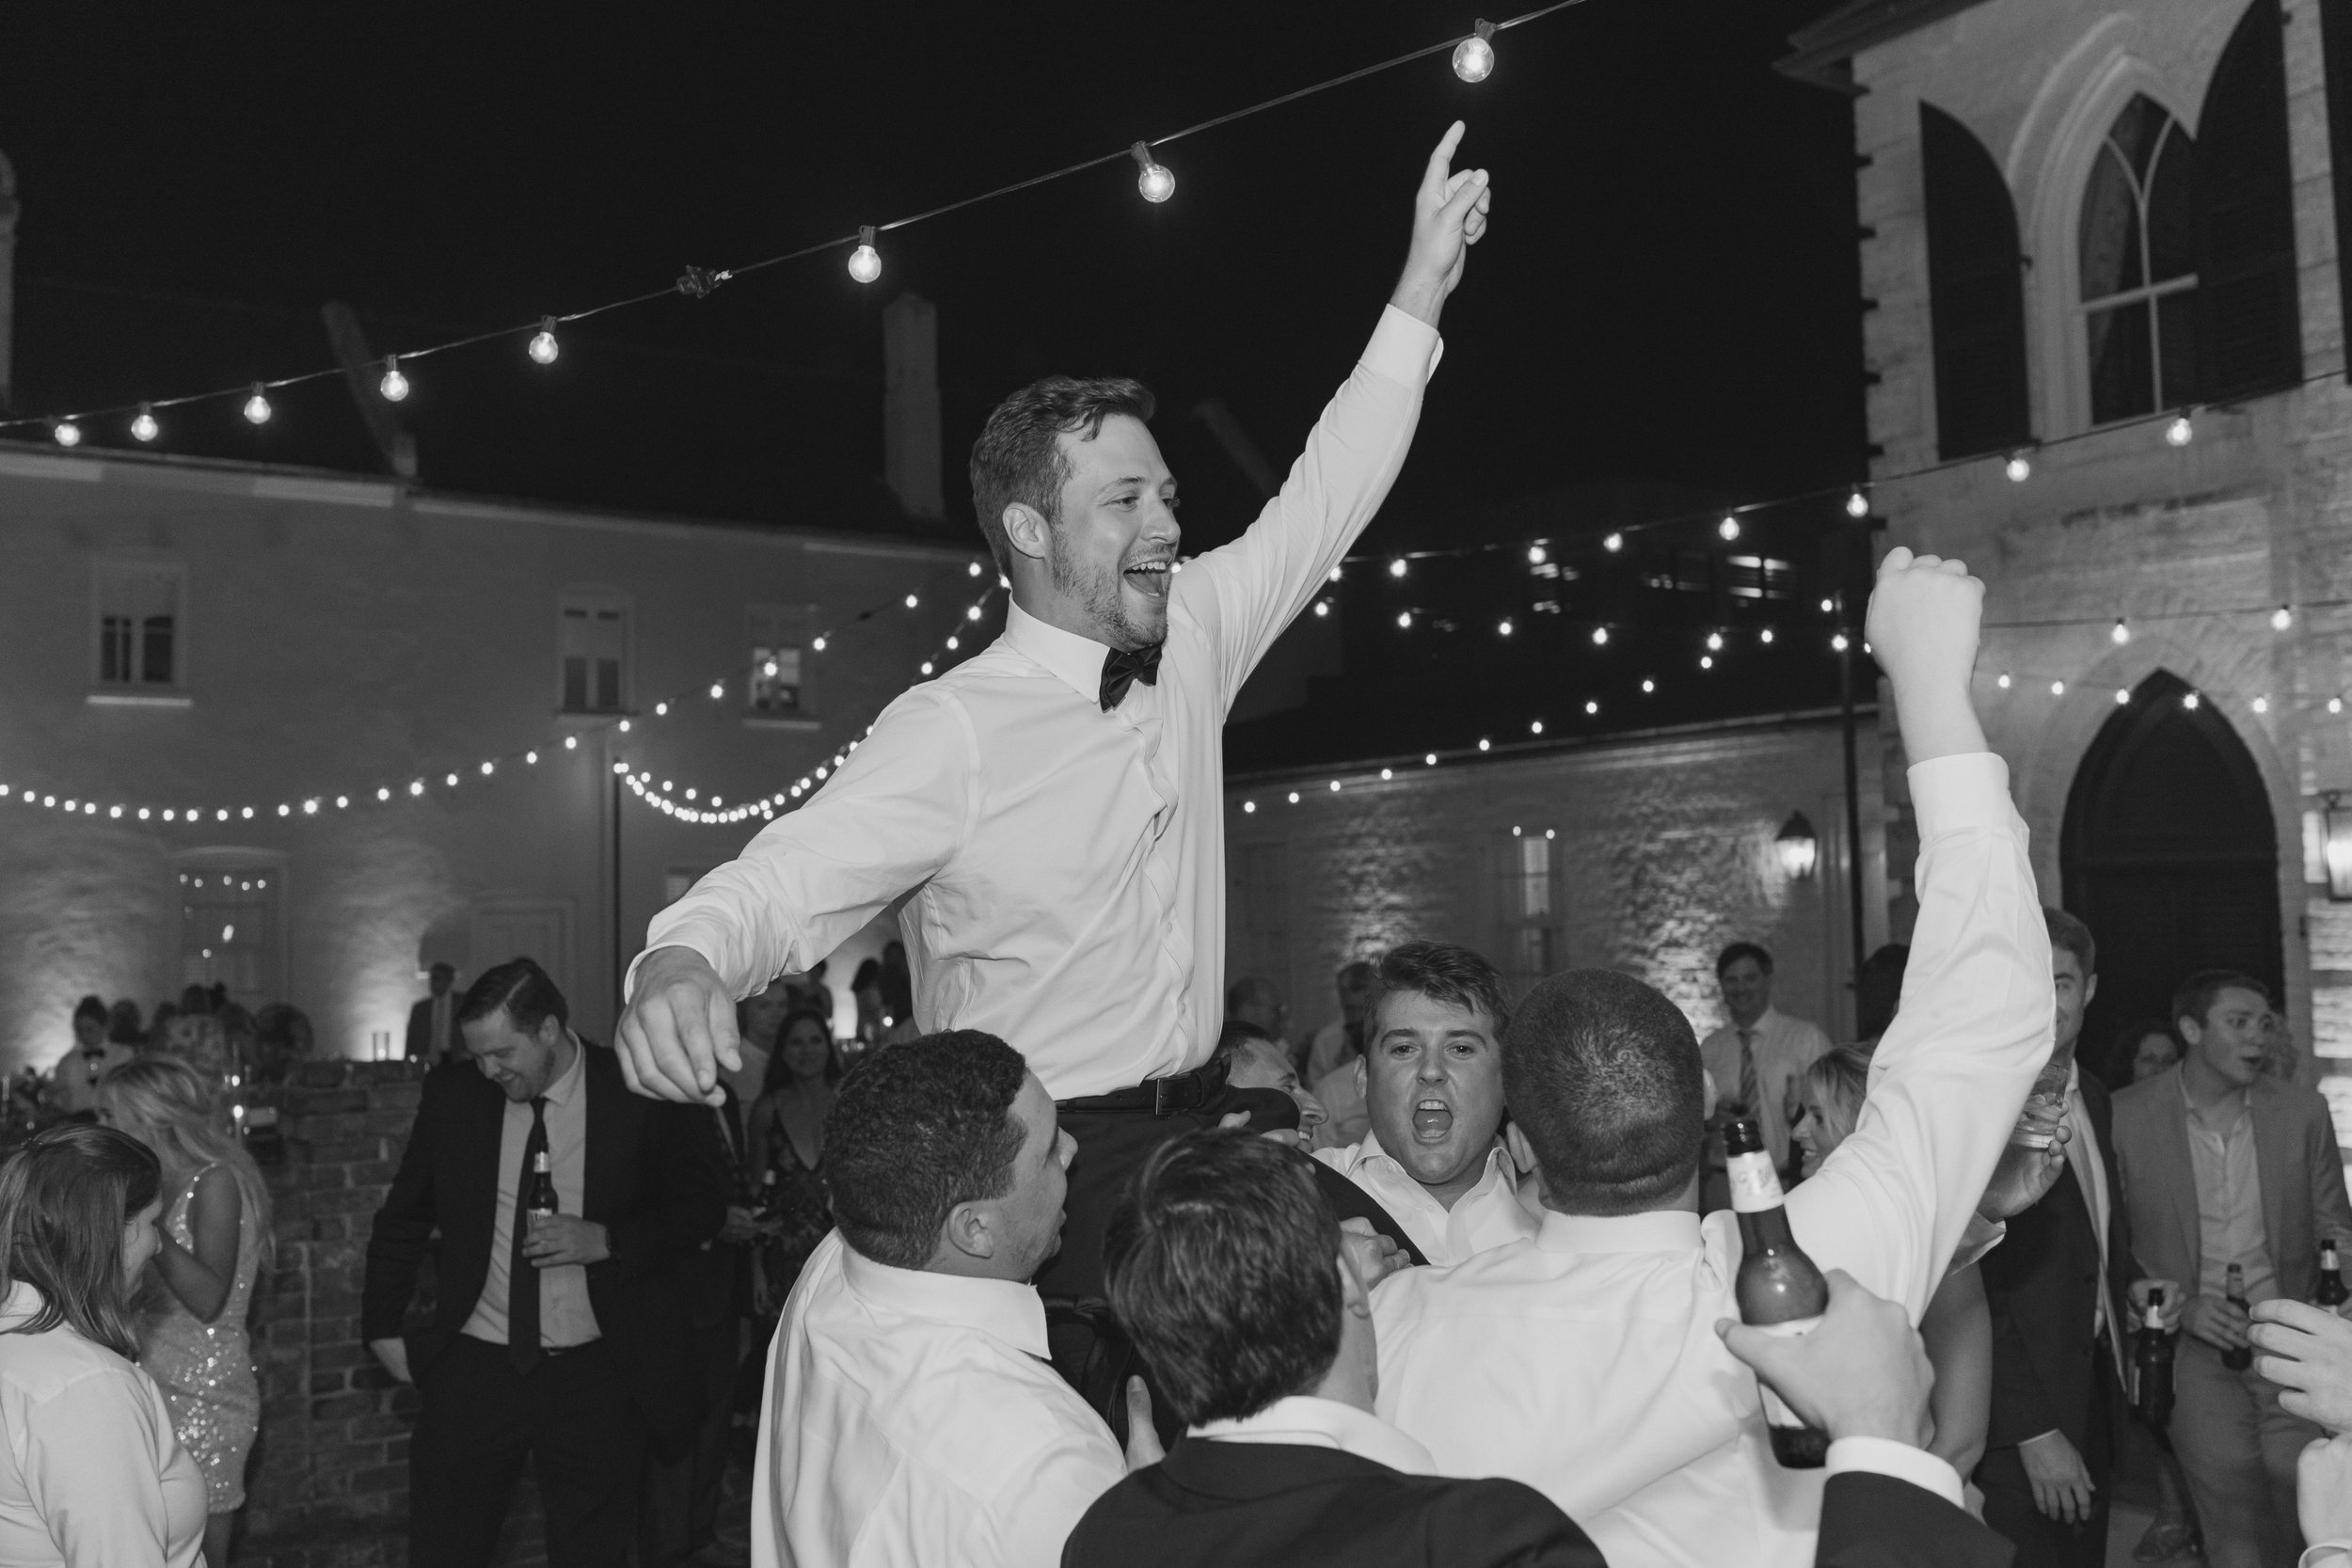 groom gets picked up in celebration during outdoor dance party at wedding reception.